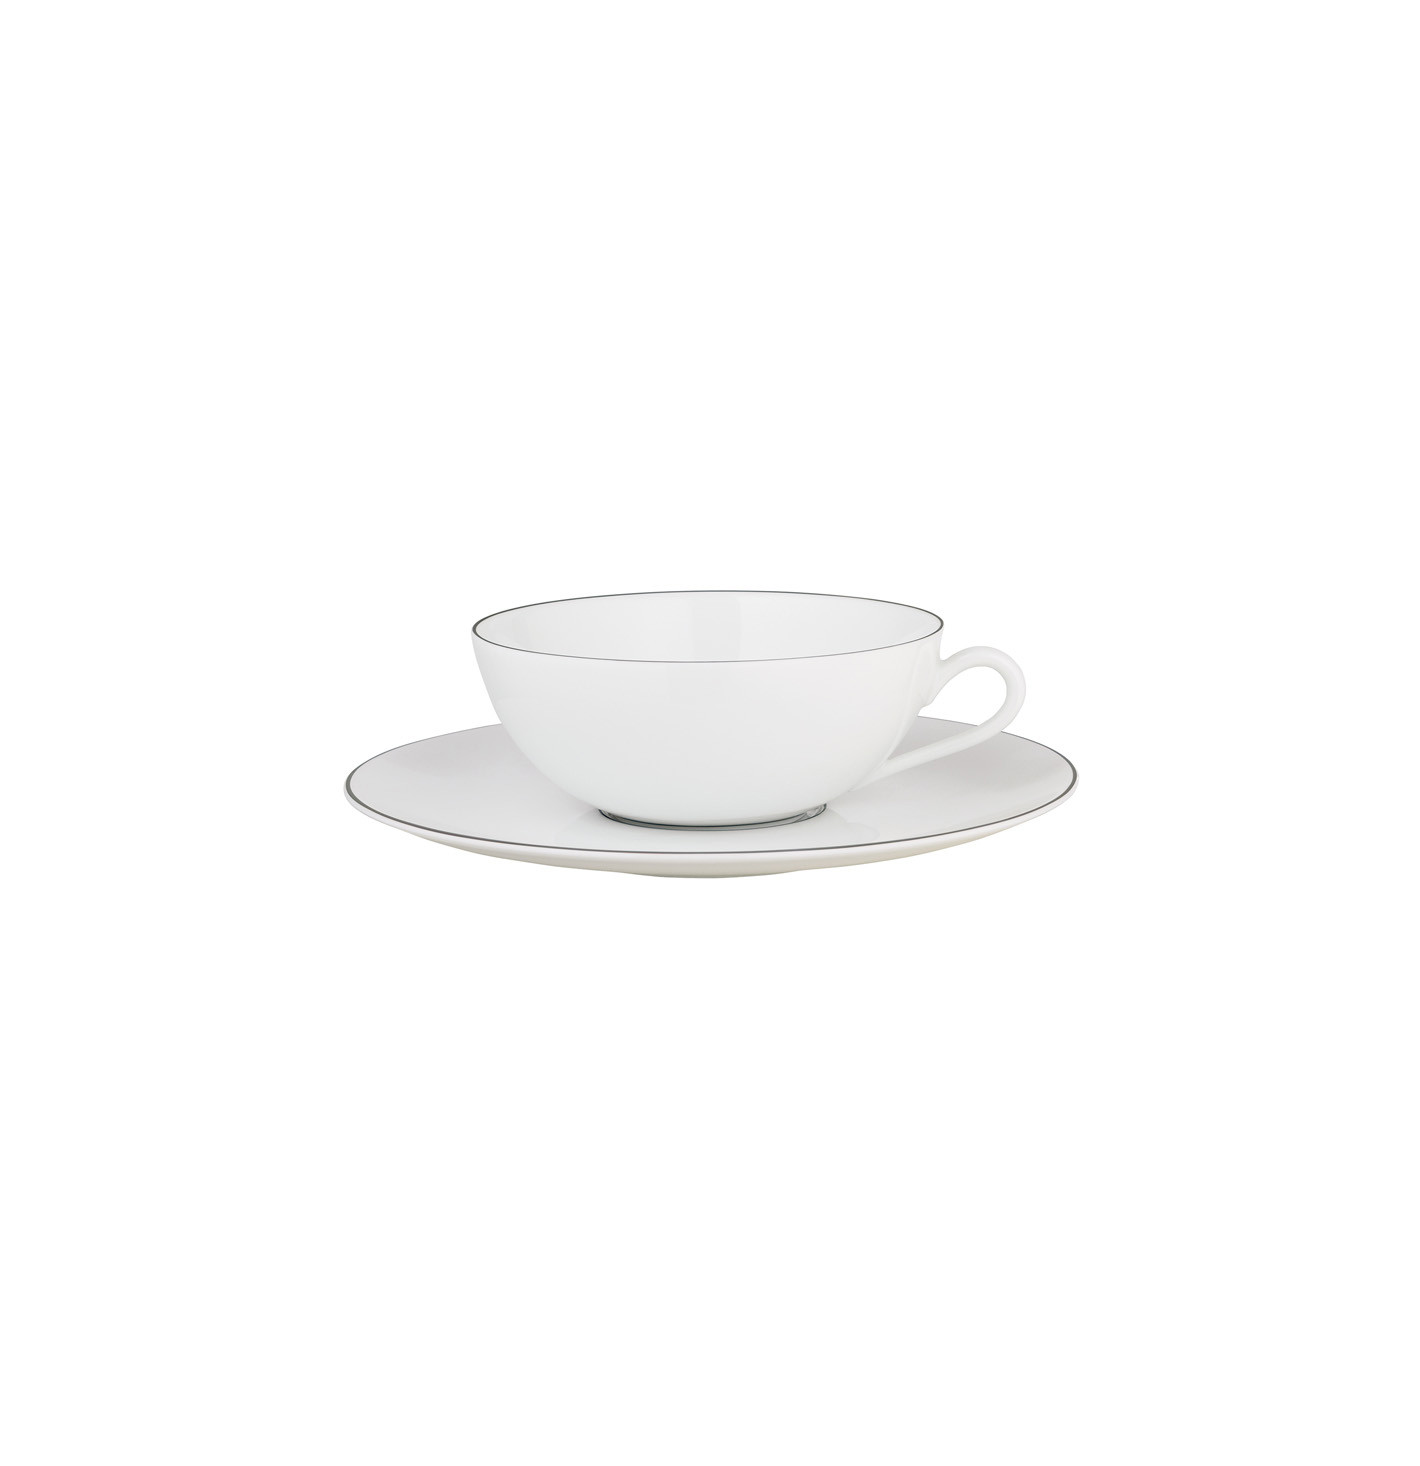 Rosenthal Beatrice cup and saucer 8 available